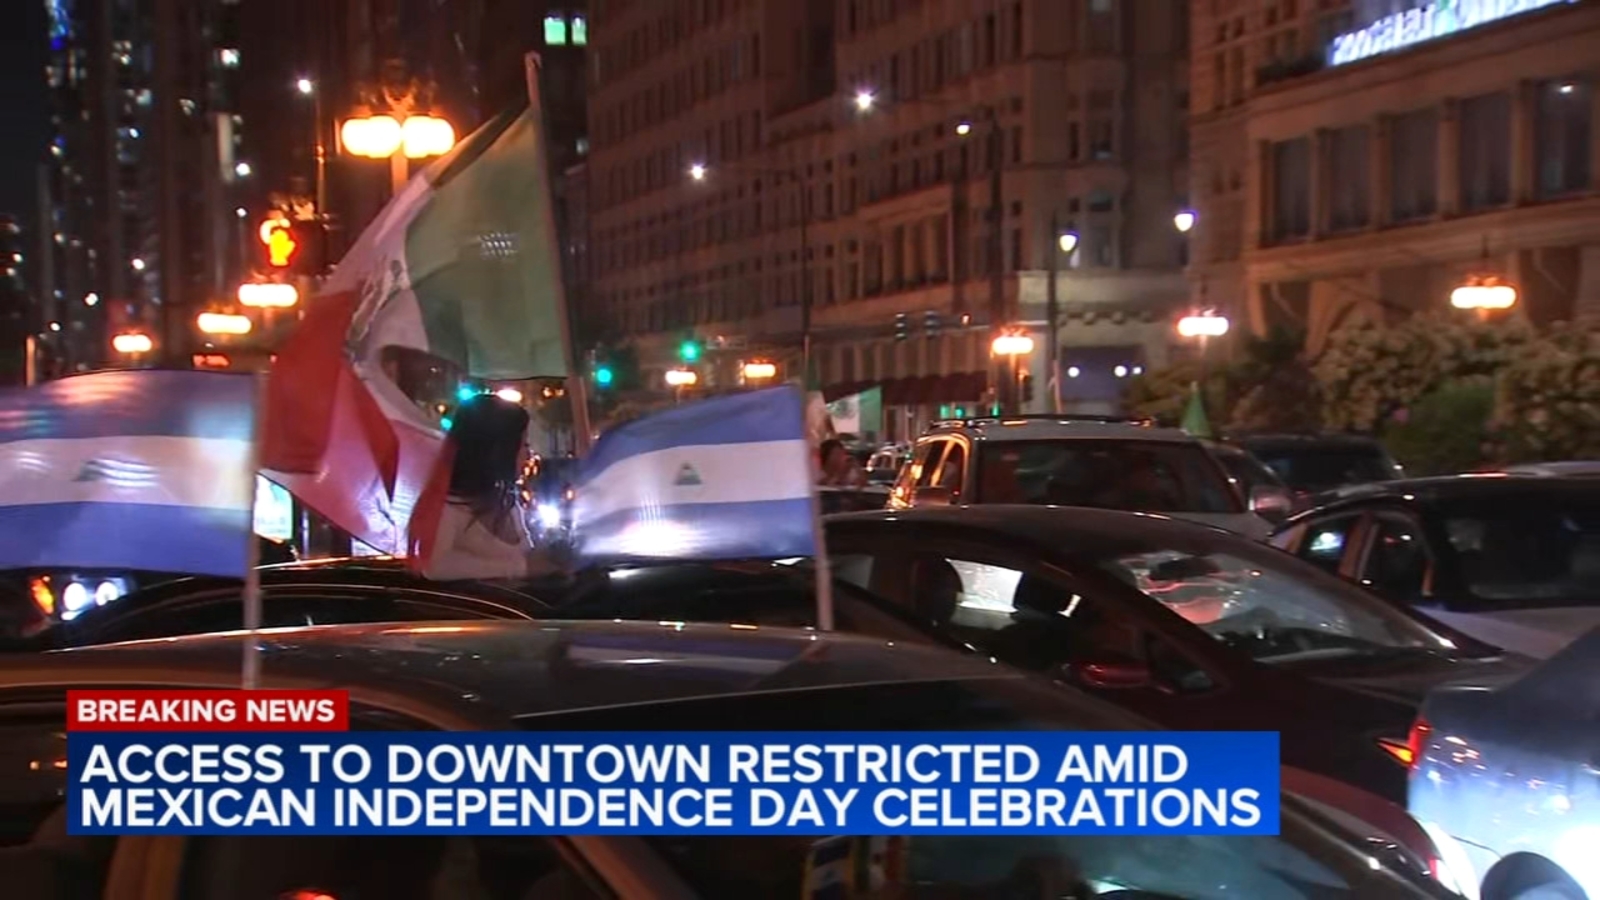 Organizers planning to hold Grant Park event for Mexican Independence Day, Chicago Alderman Brendan Reilly says [Video]